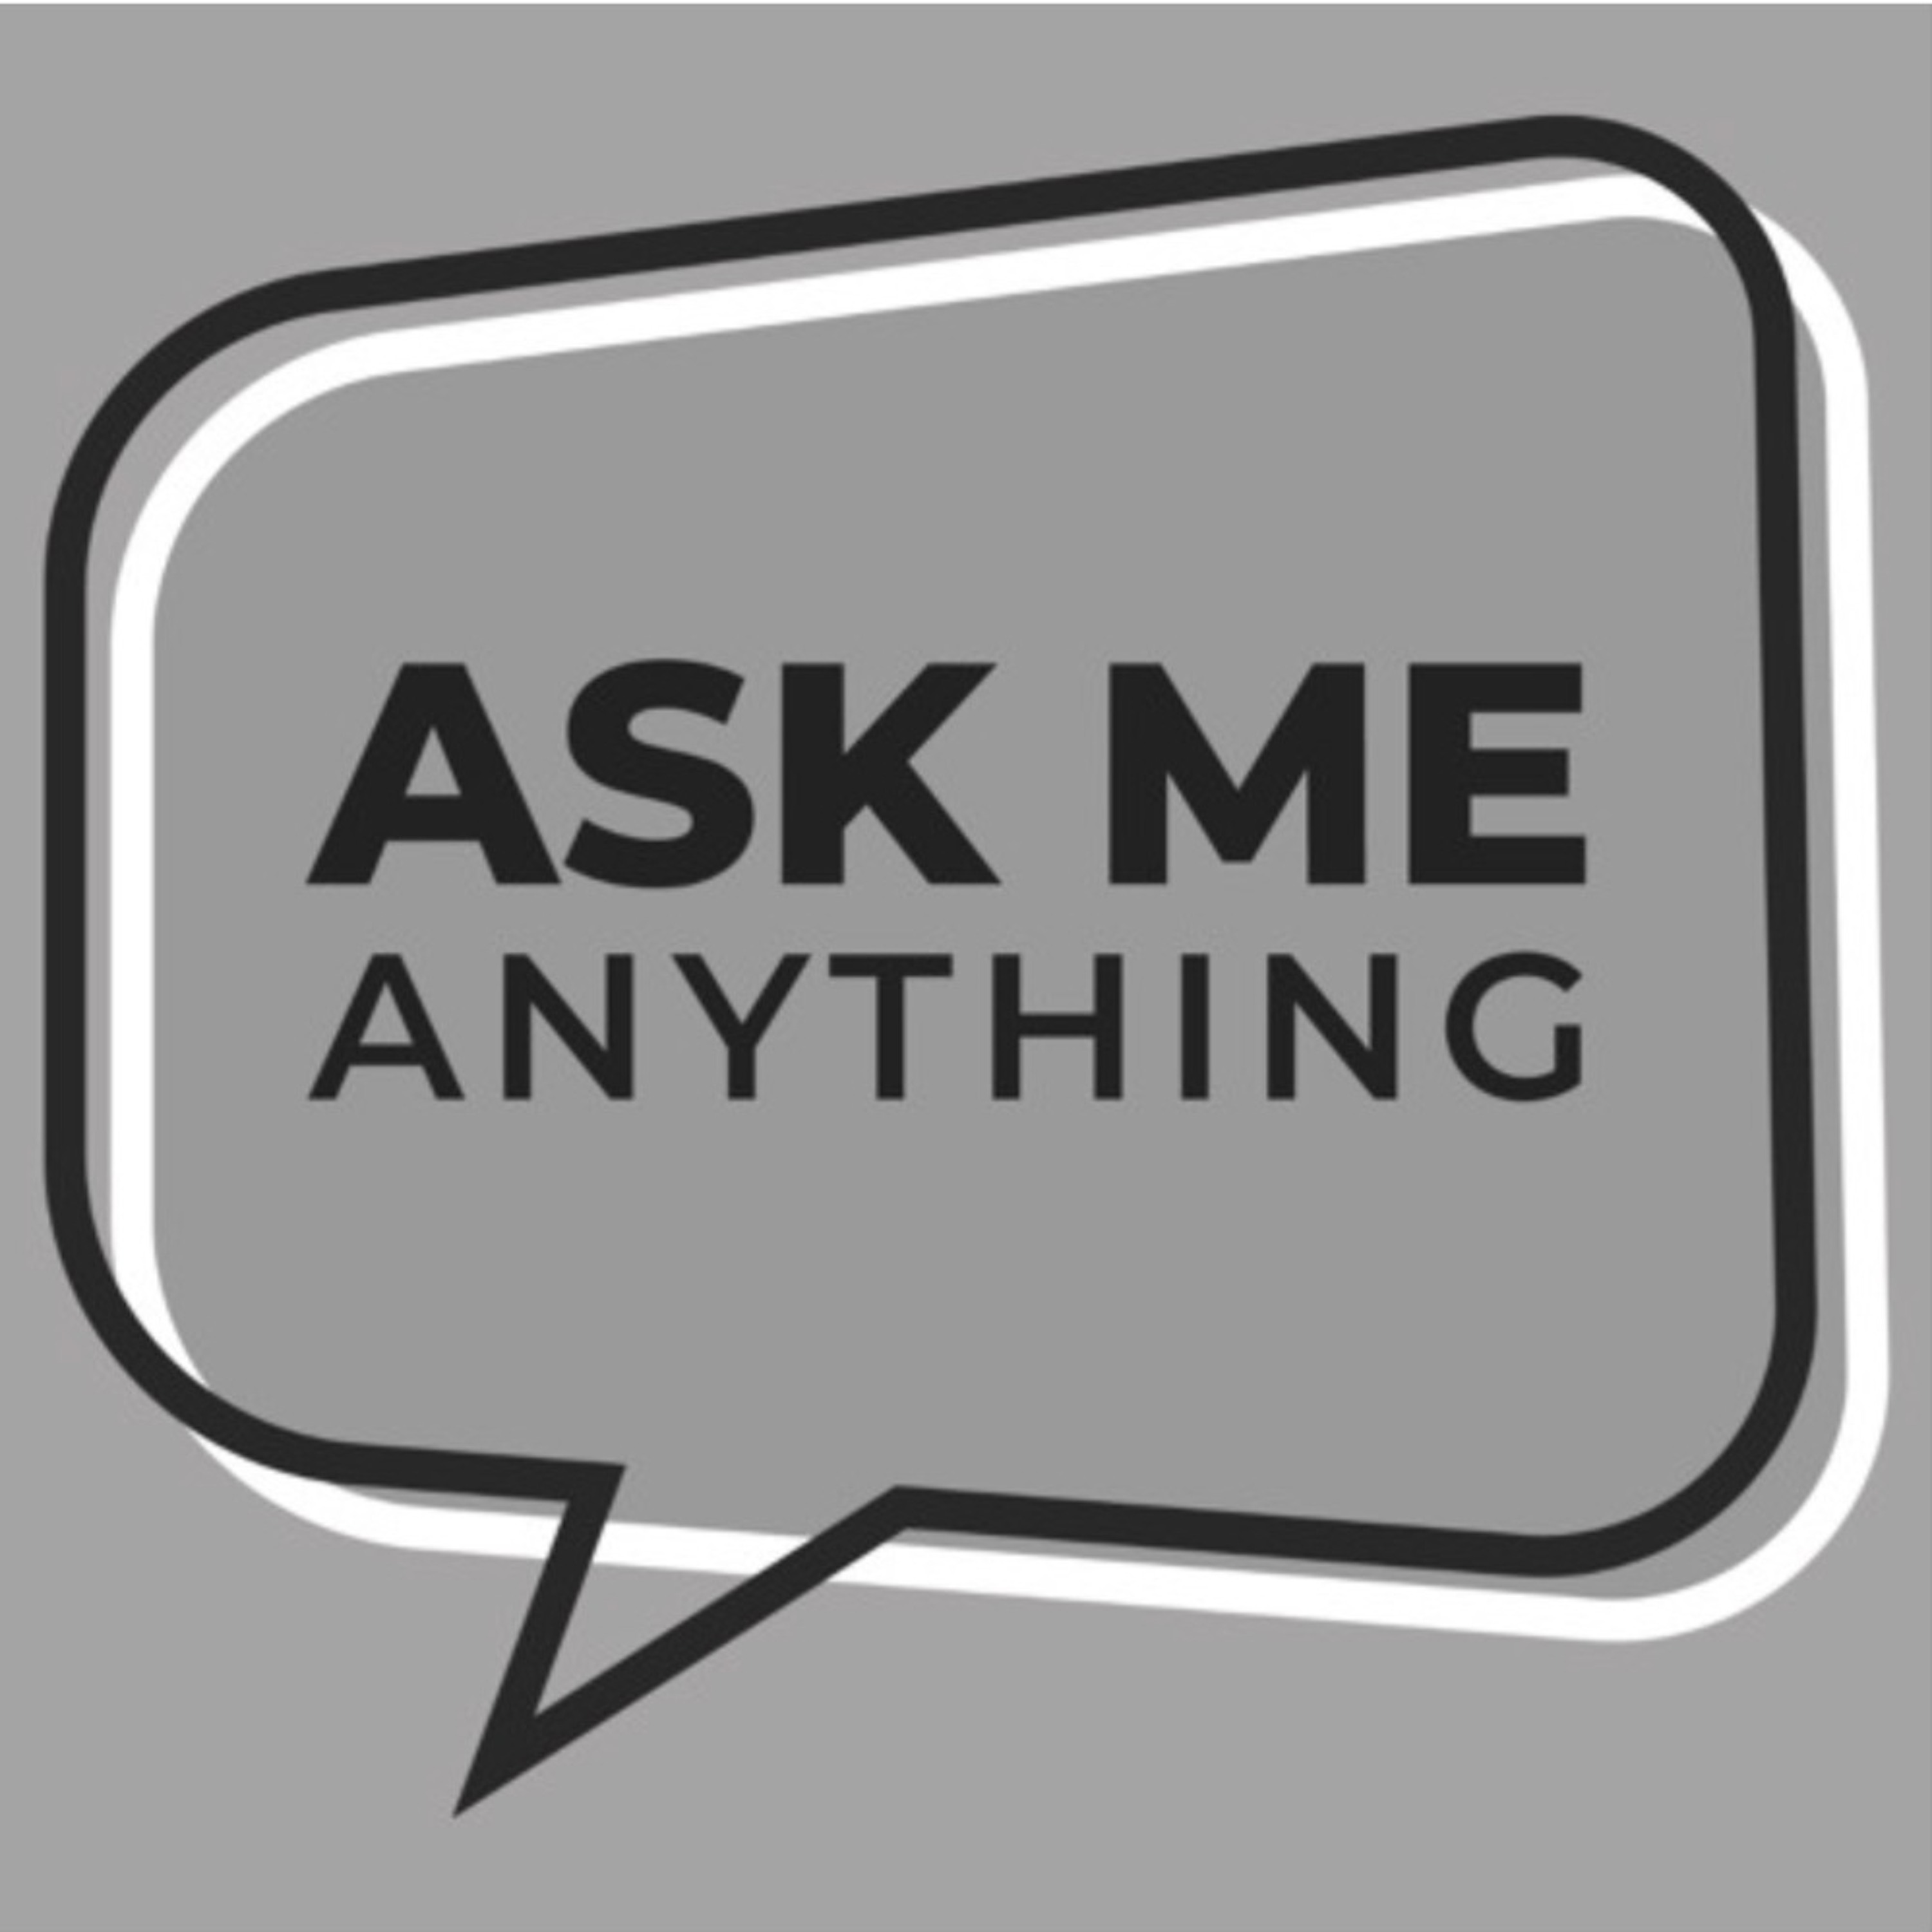 Ask Me Anything, Theresa Payton. Digital Investigation Priorities. Sponsored By Pipl.